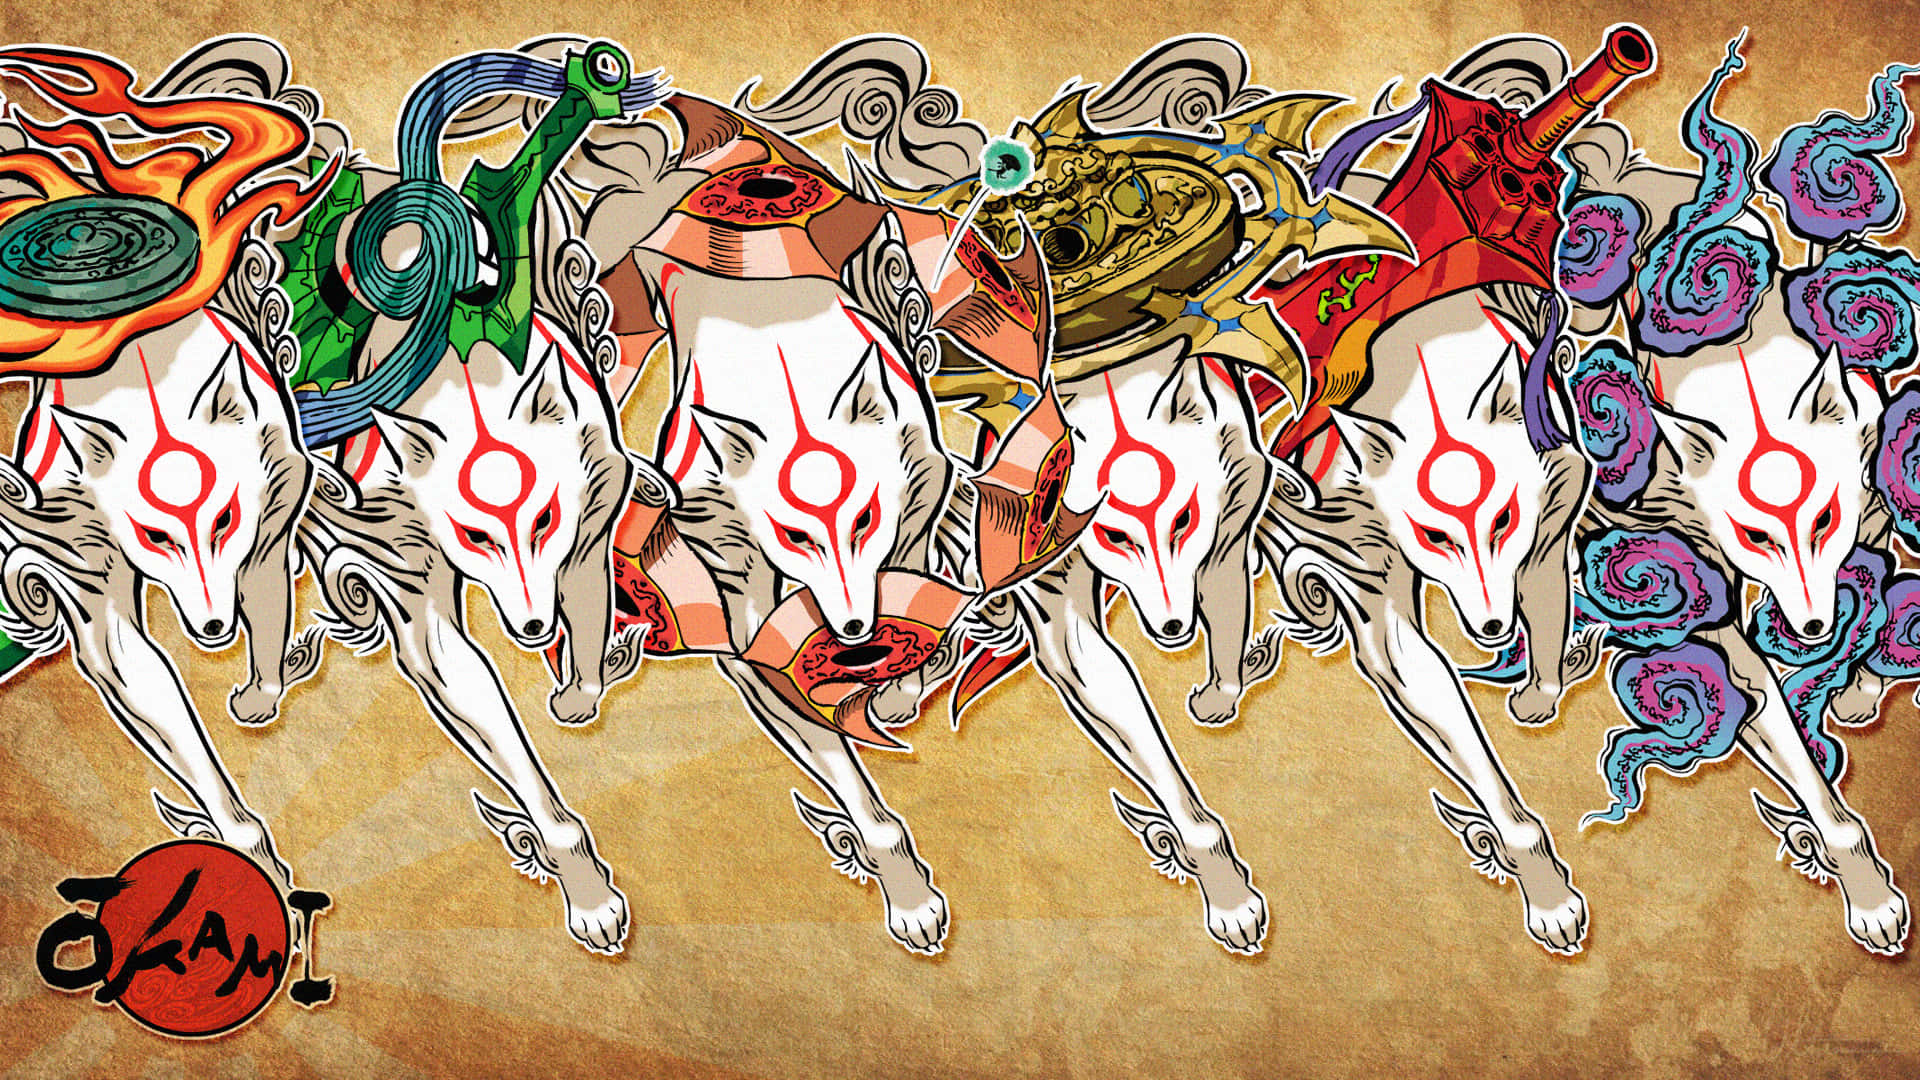 A Group Of Horses With Different Designs Wallpaper